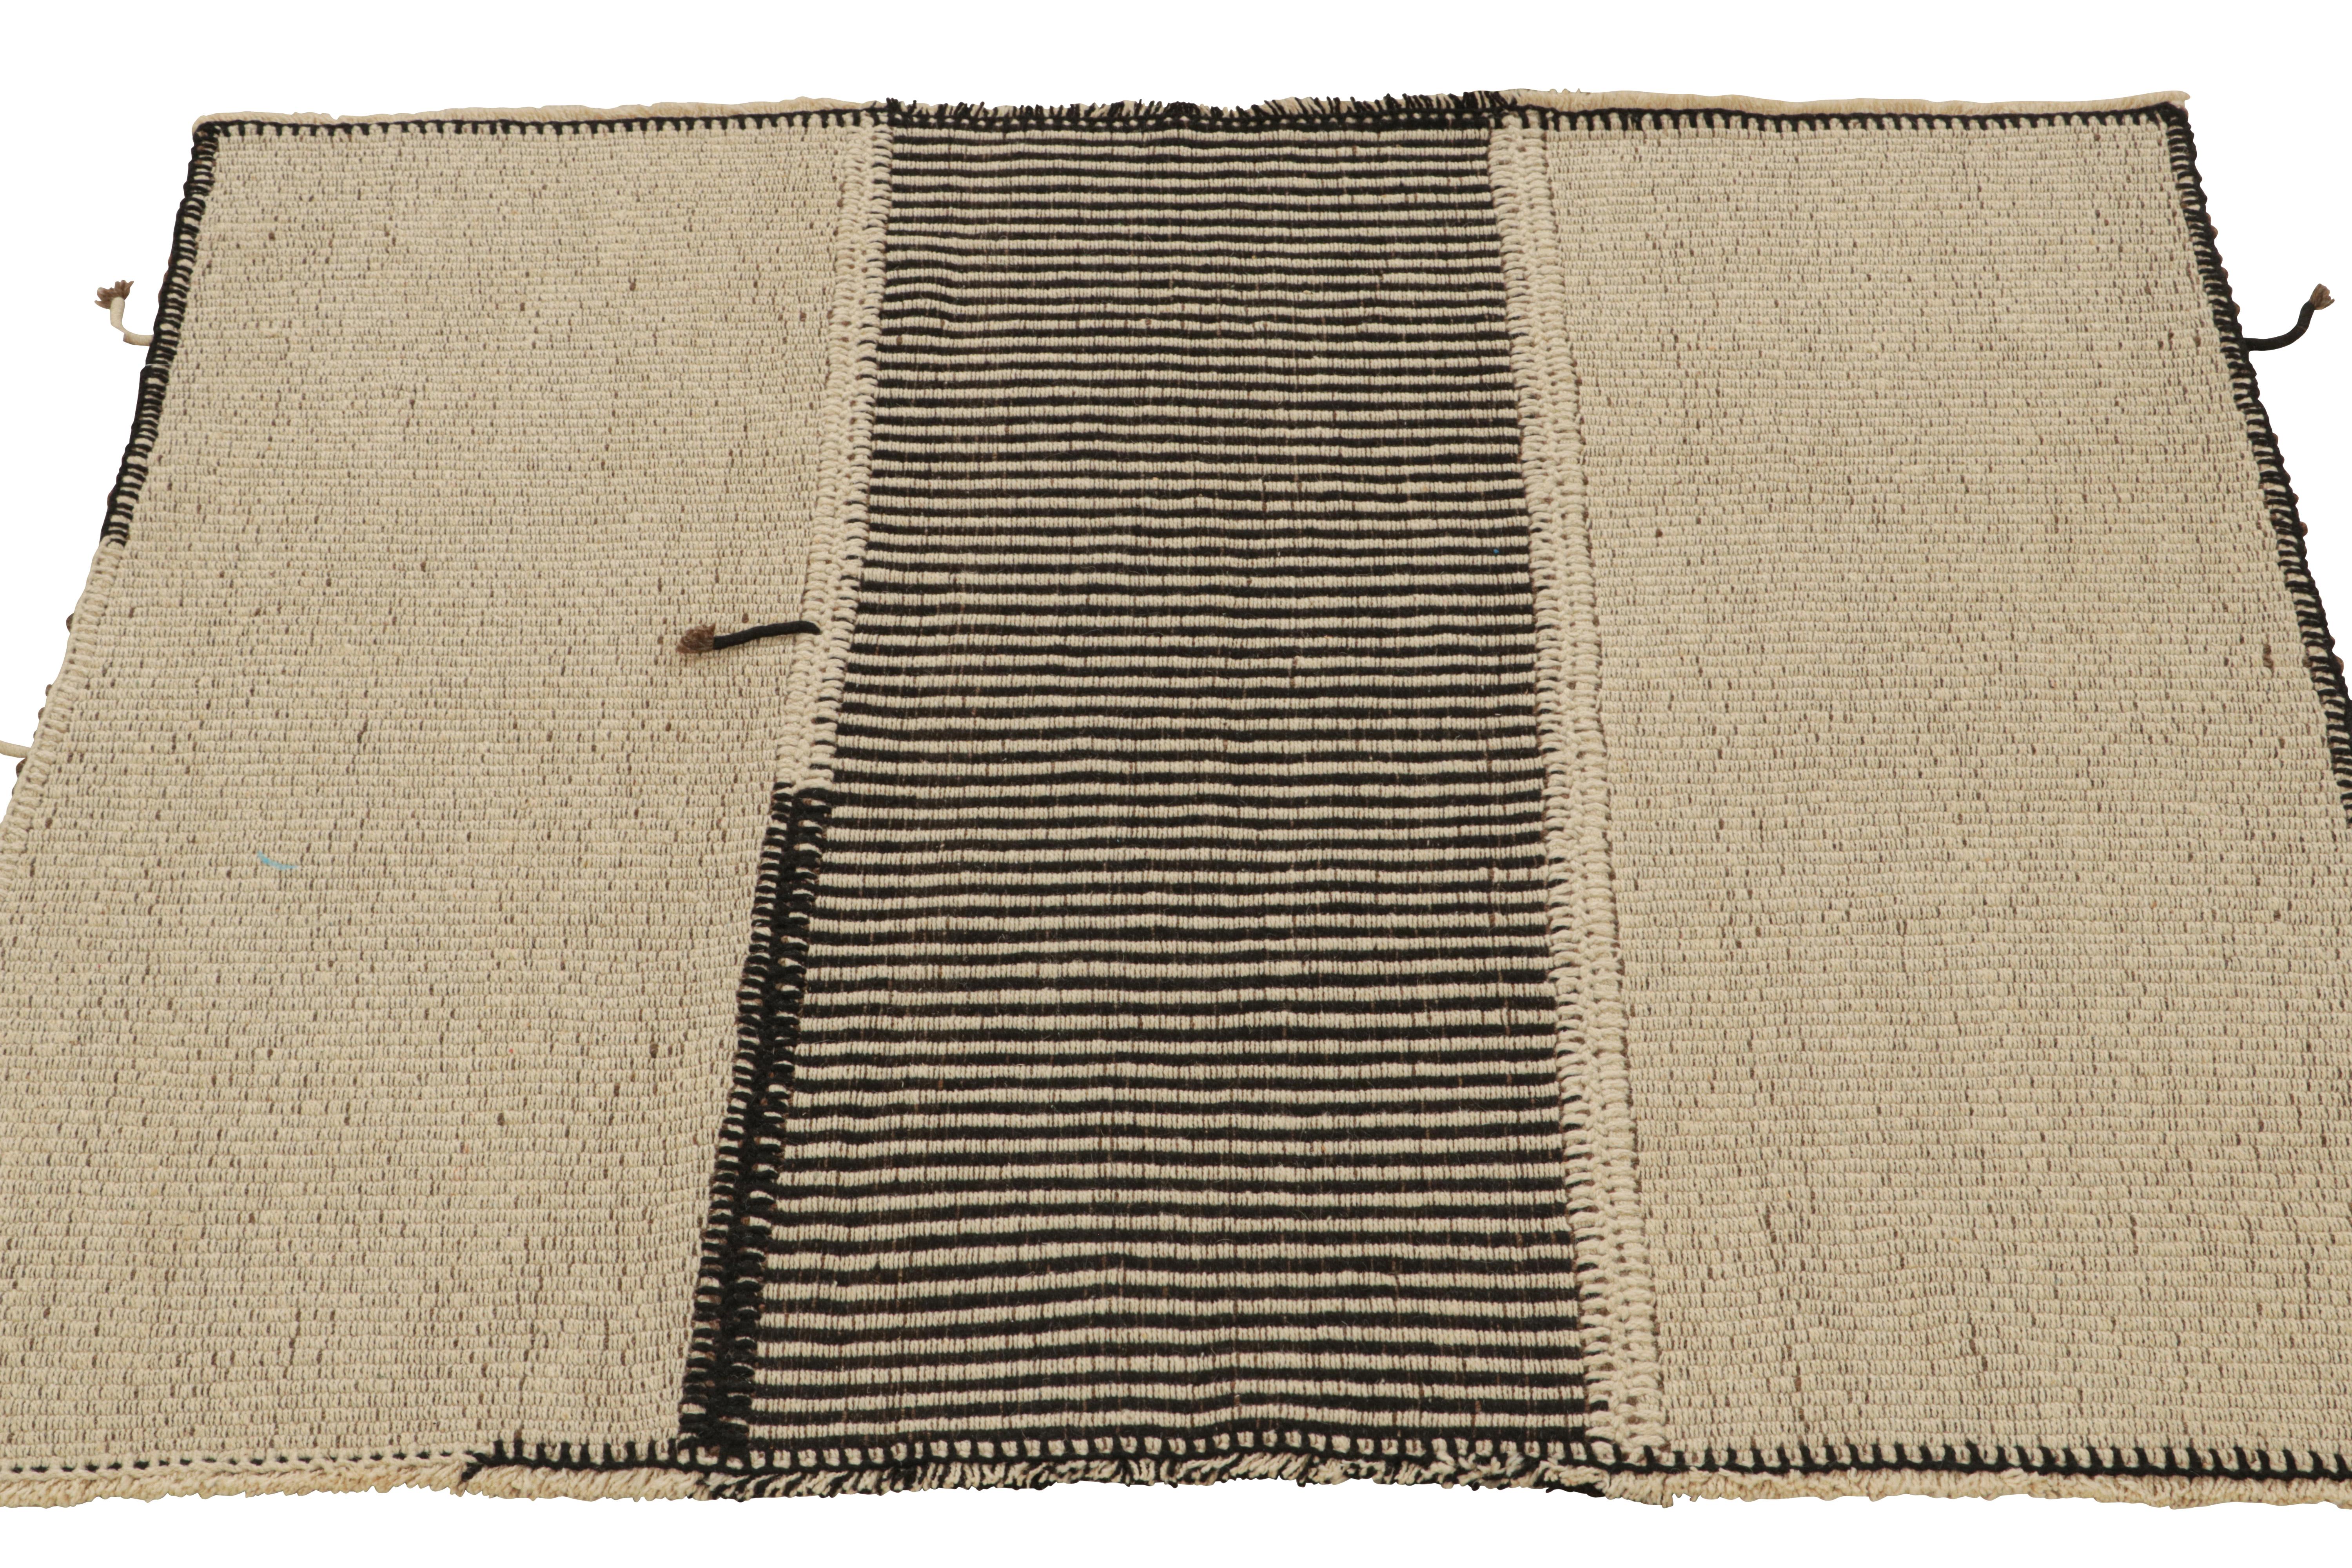 Handwoven in wool, this square 5x5 Kilim is from a bold new line of contemporary flatweaves by Rug & Kilim.

Further On the Design:

The “Rez Kilim” connotes a modern take on classic panel weaving. This edition enjoys beige with rich brown and